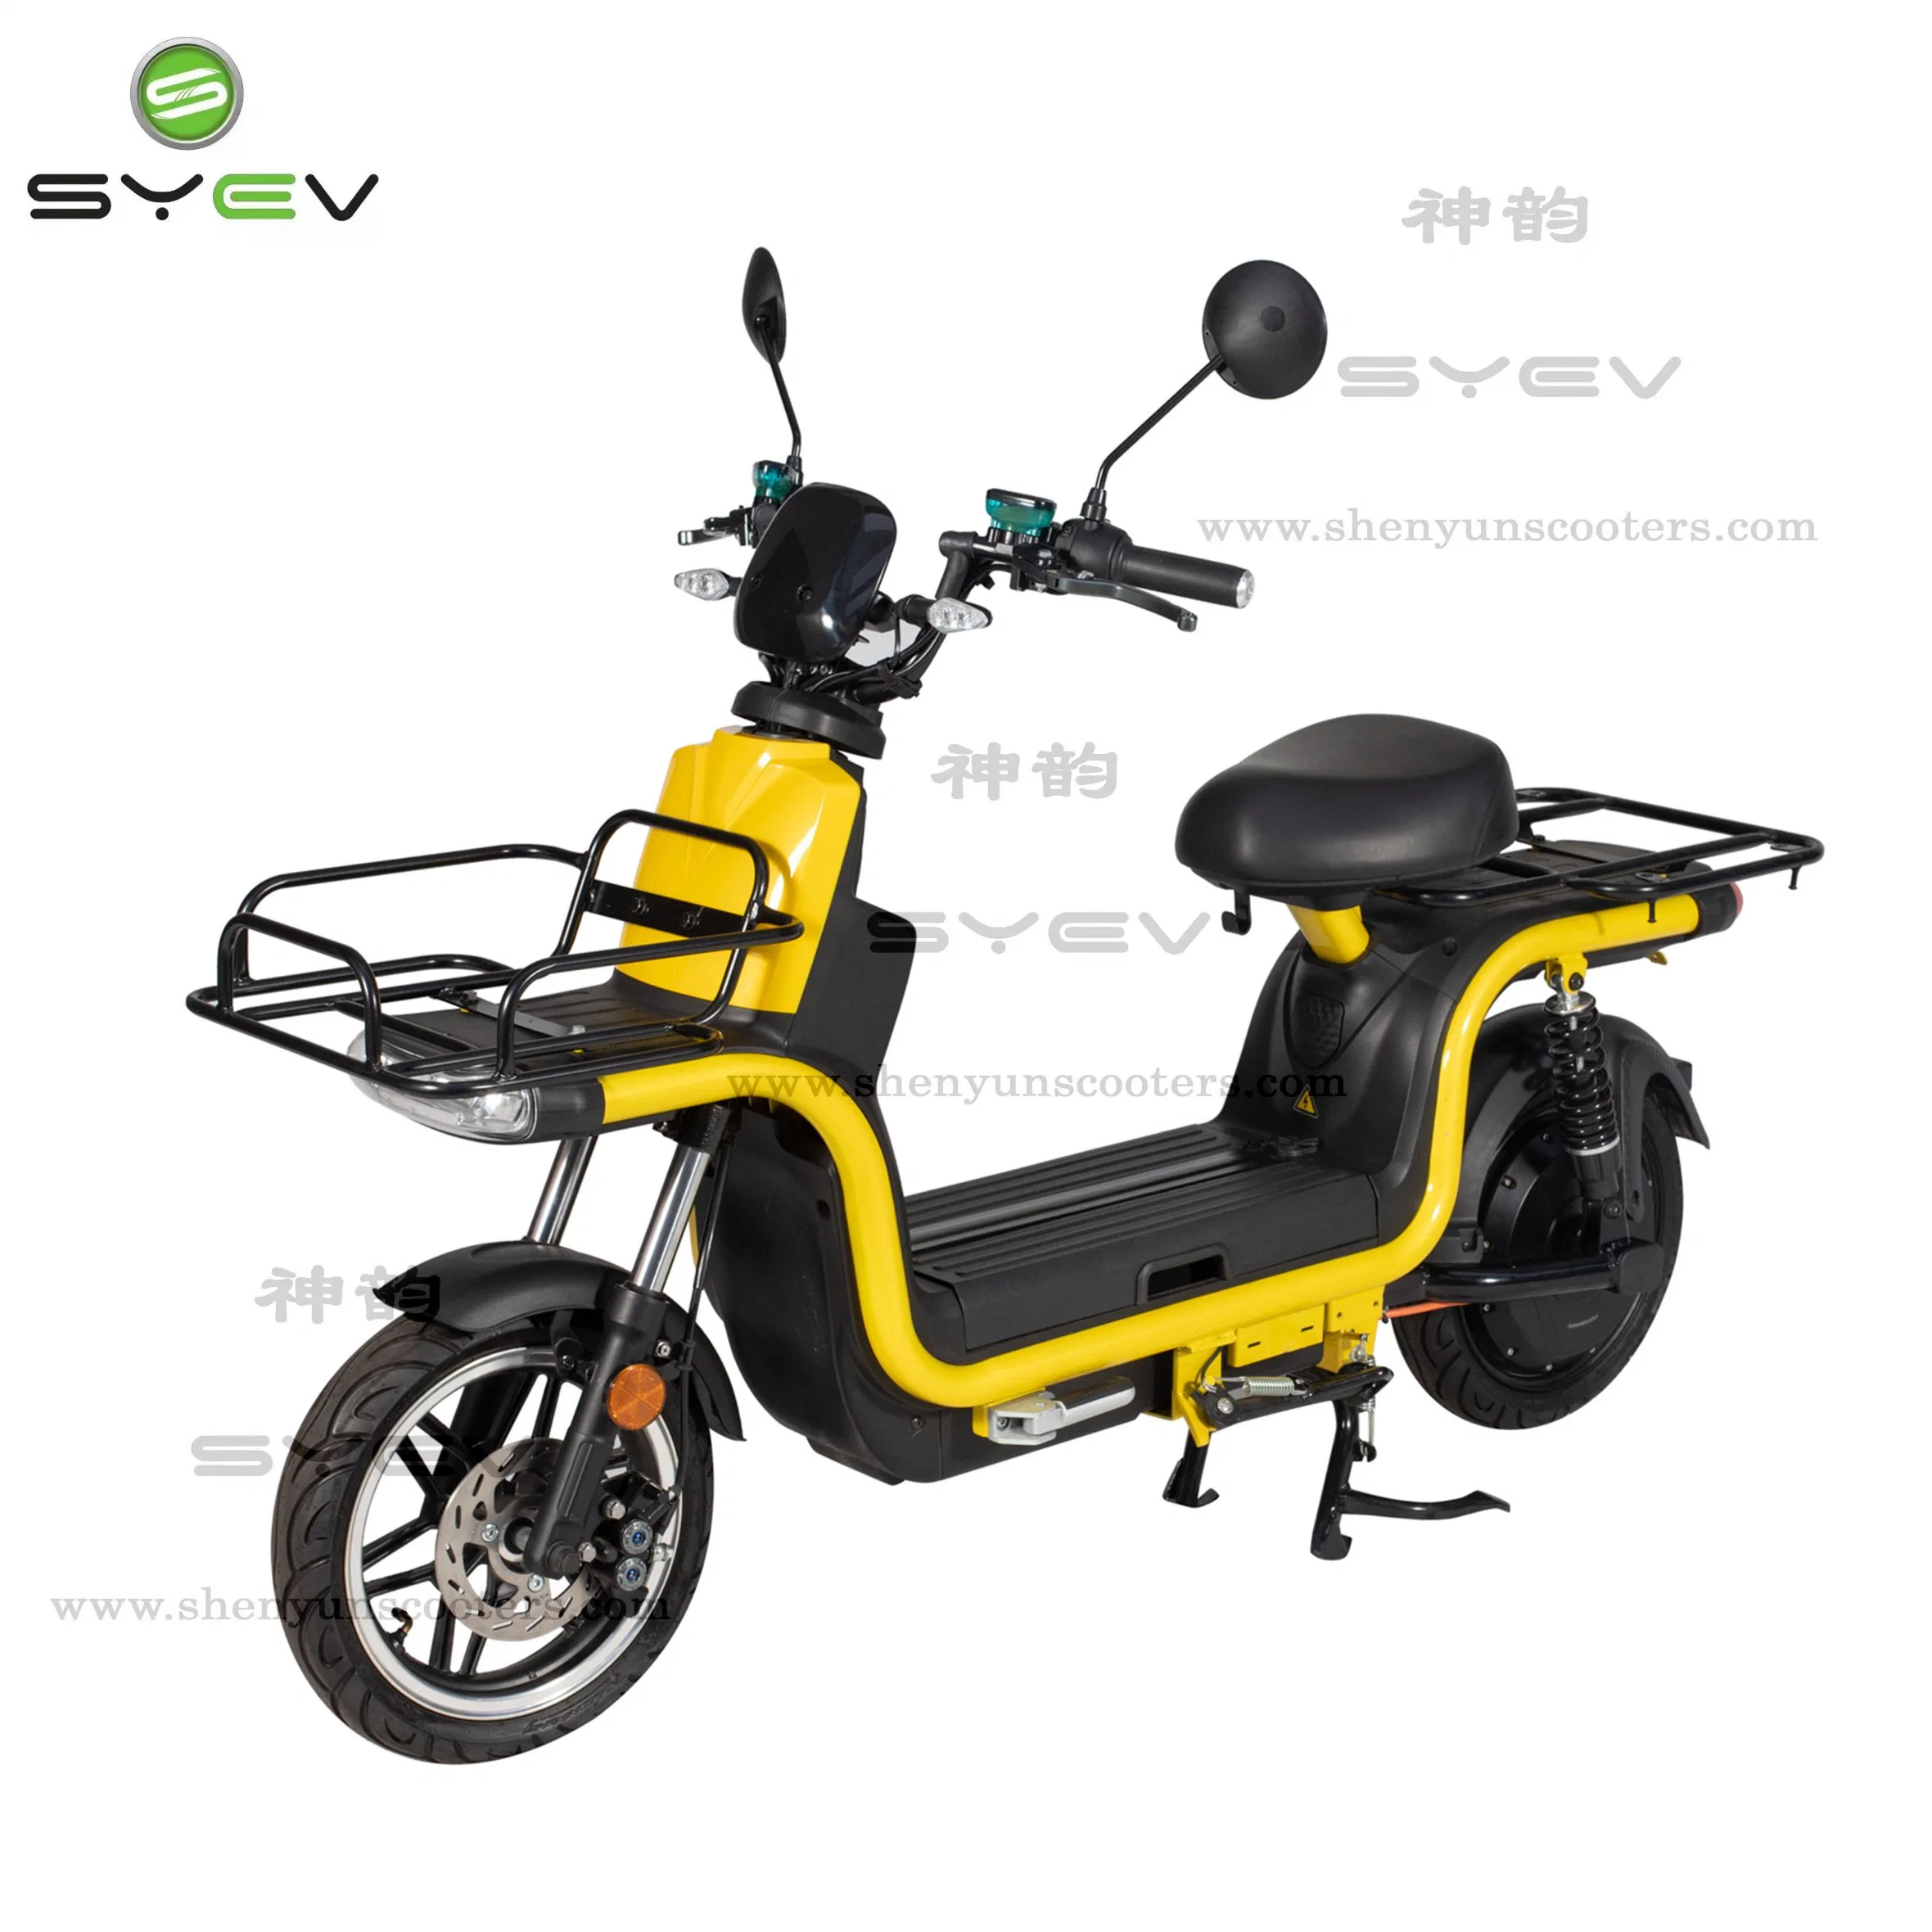 Syev Best for Delivery High Quality Electric Scooter with High Performance Electric Scooter Motorcycle 800W/1200W